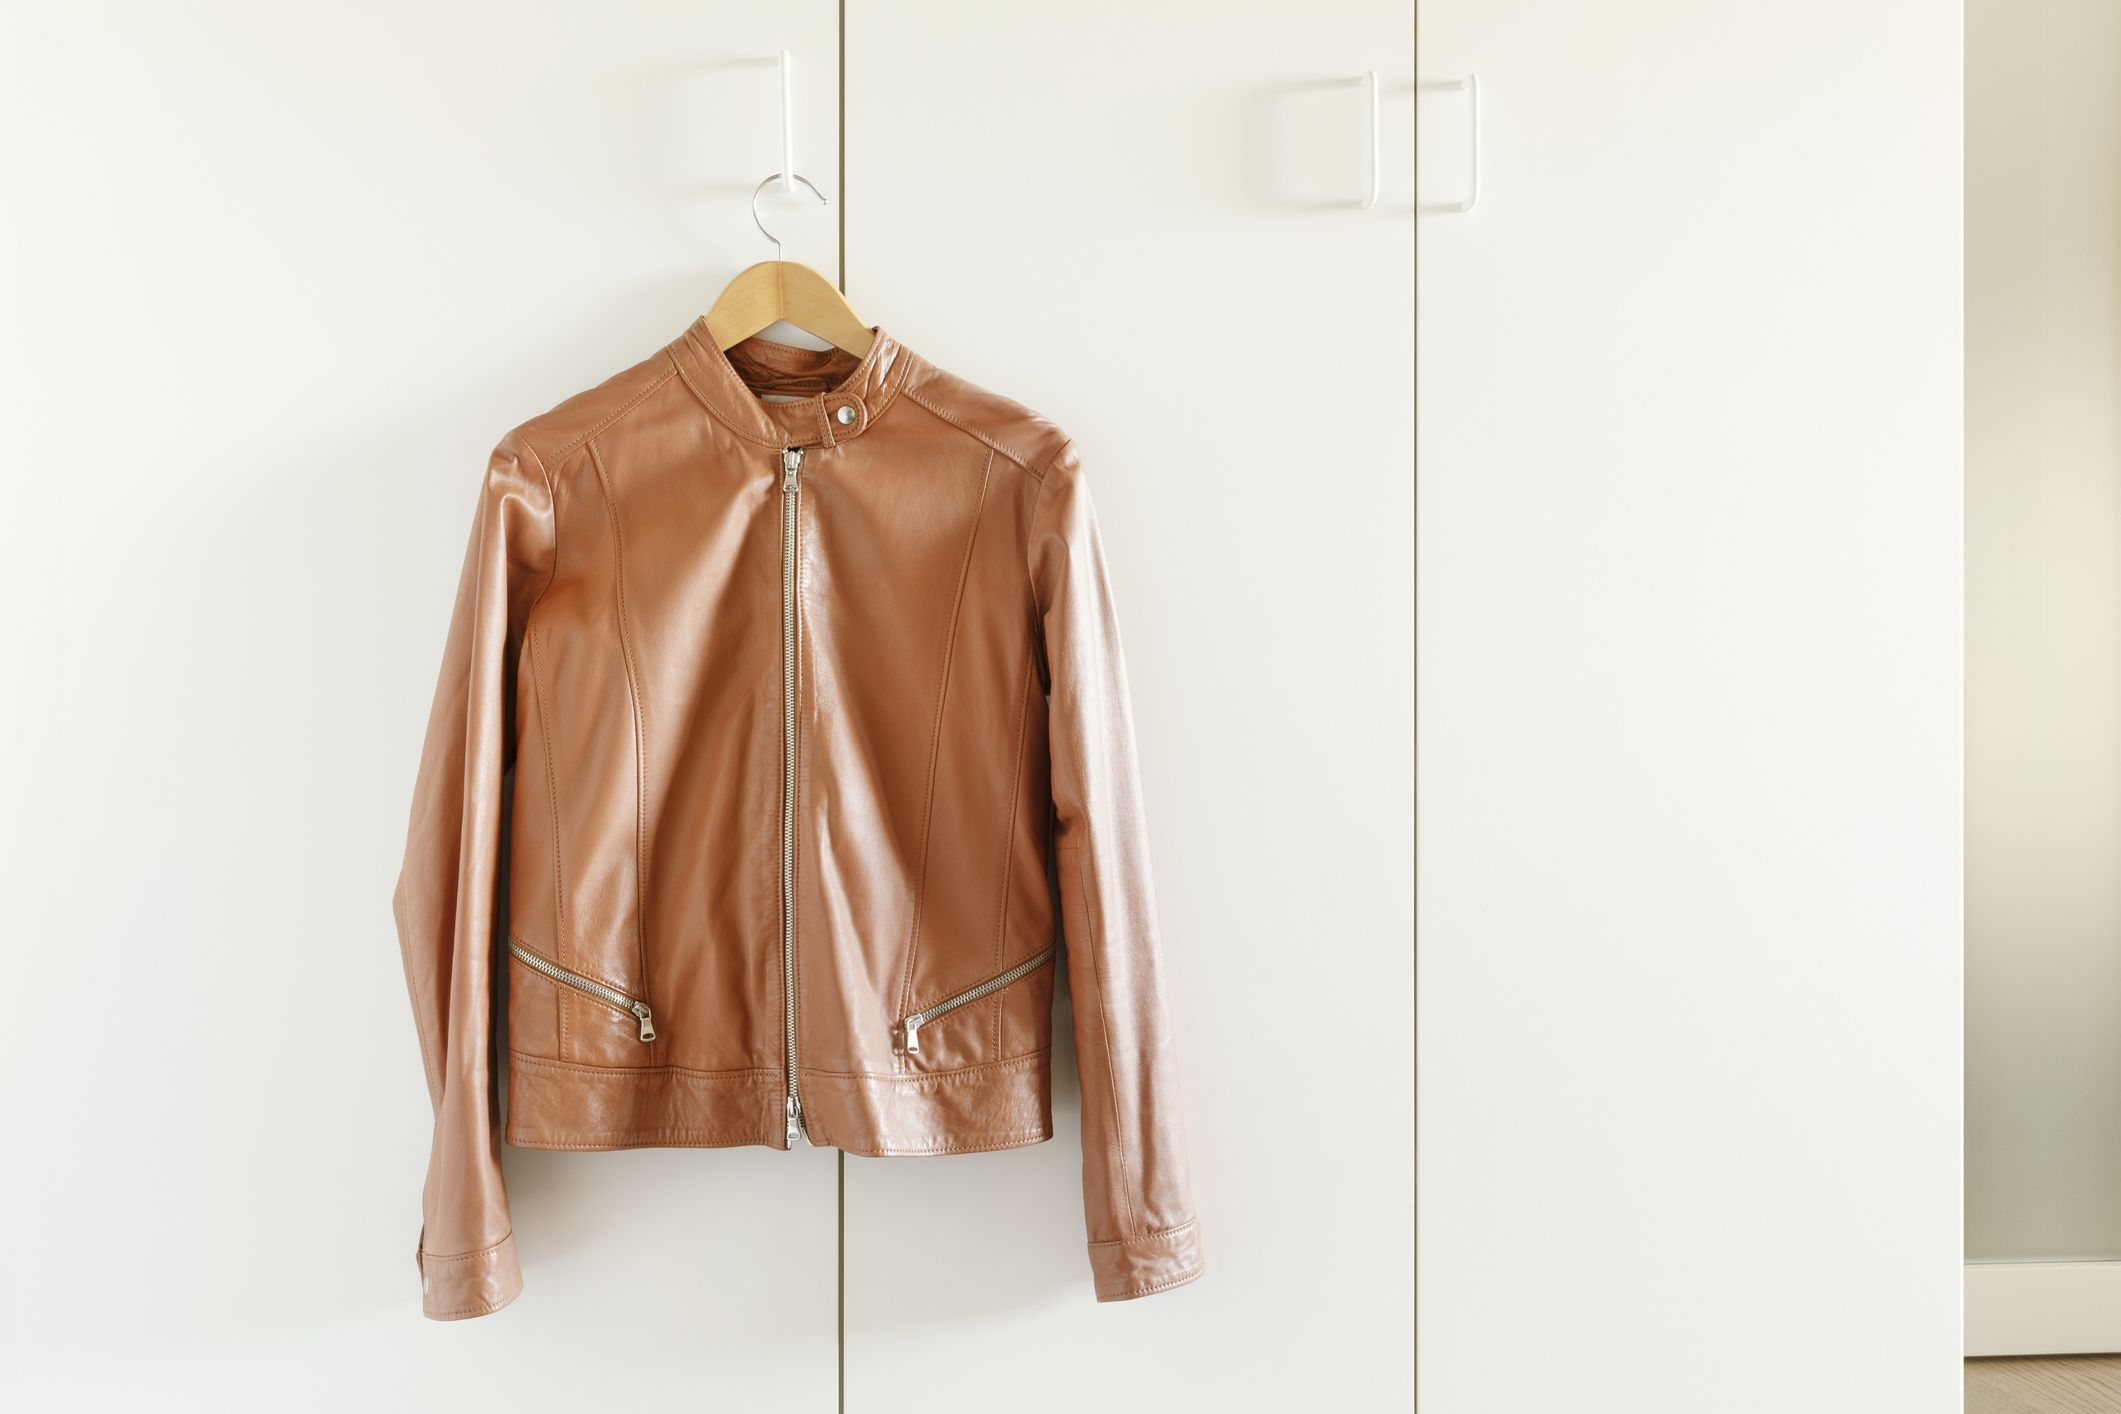 How to Clean and Protect a Leather Jacket